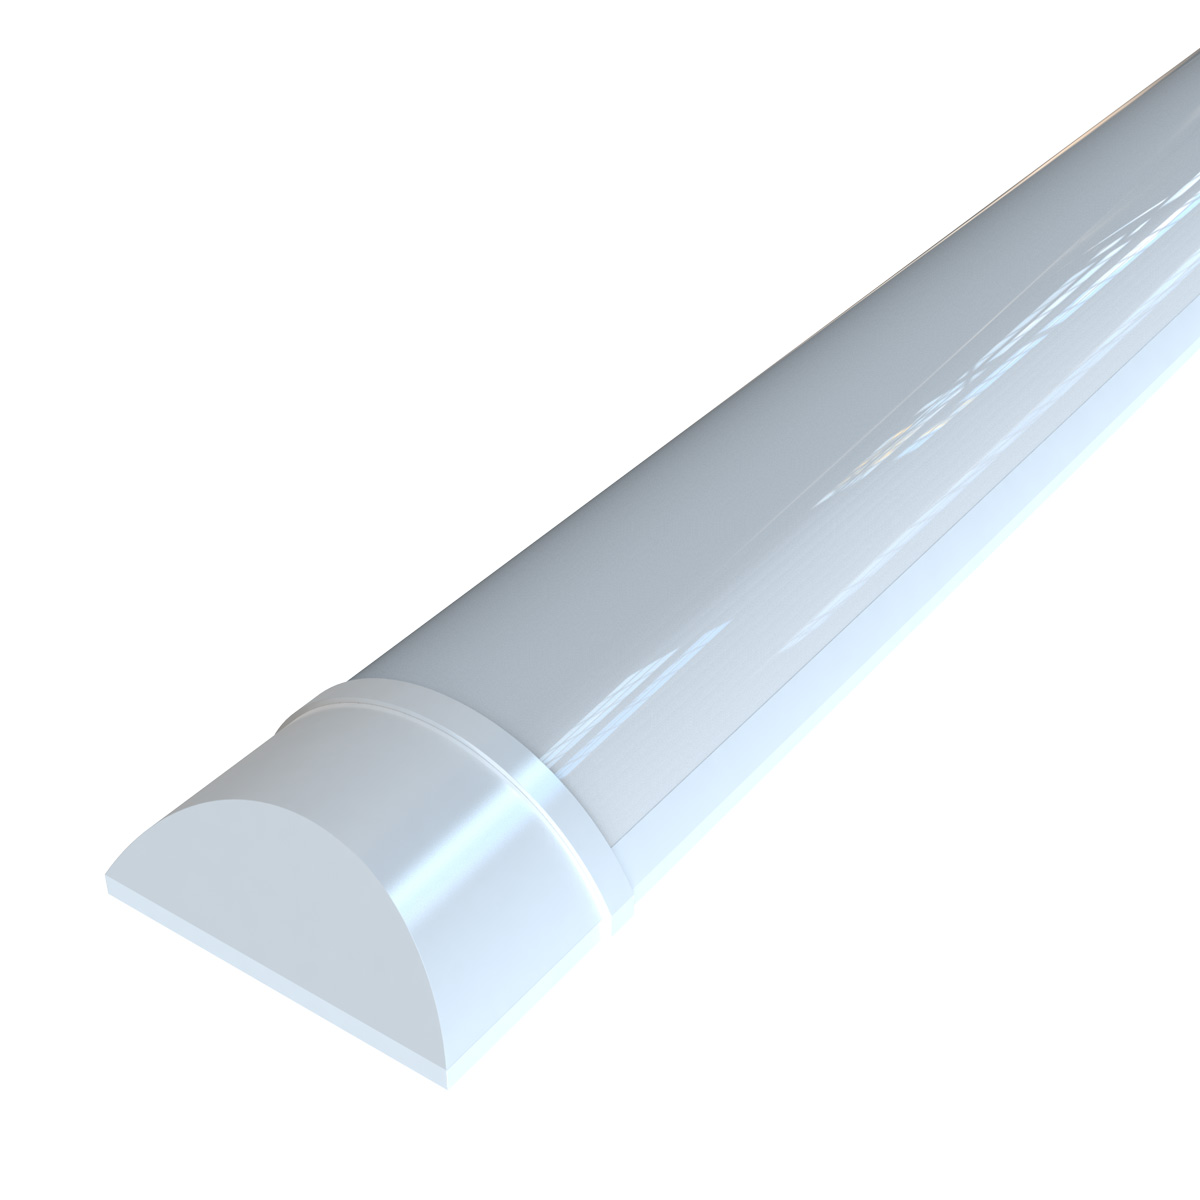 View 5 Foot 1500mm LED Batten 43w 4000K 6500K Natural or Cool White information